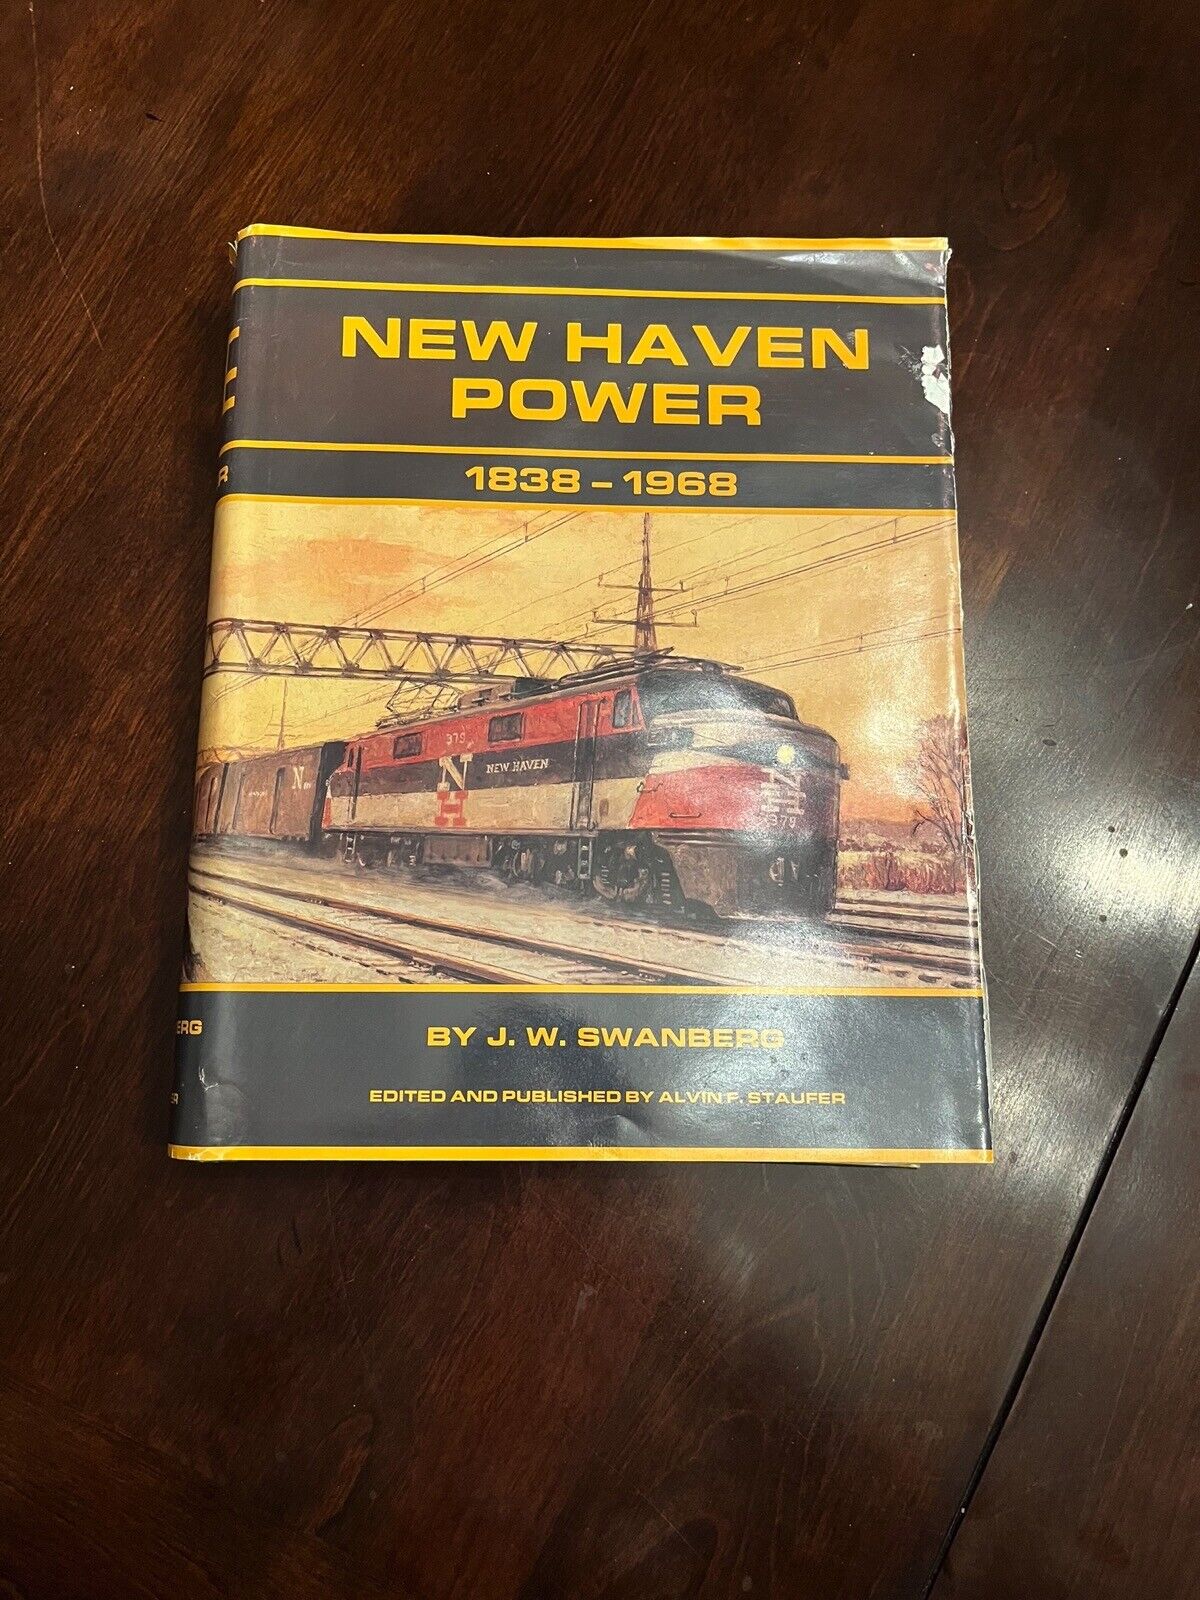 New Haven Power, 1838-1968 by J. W. Swanberg ©1988 HC/DJ 592 Pages